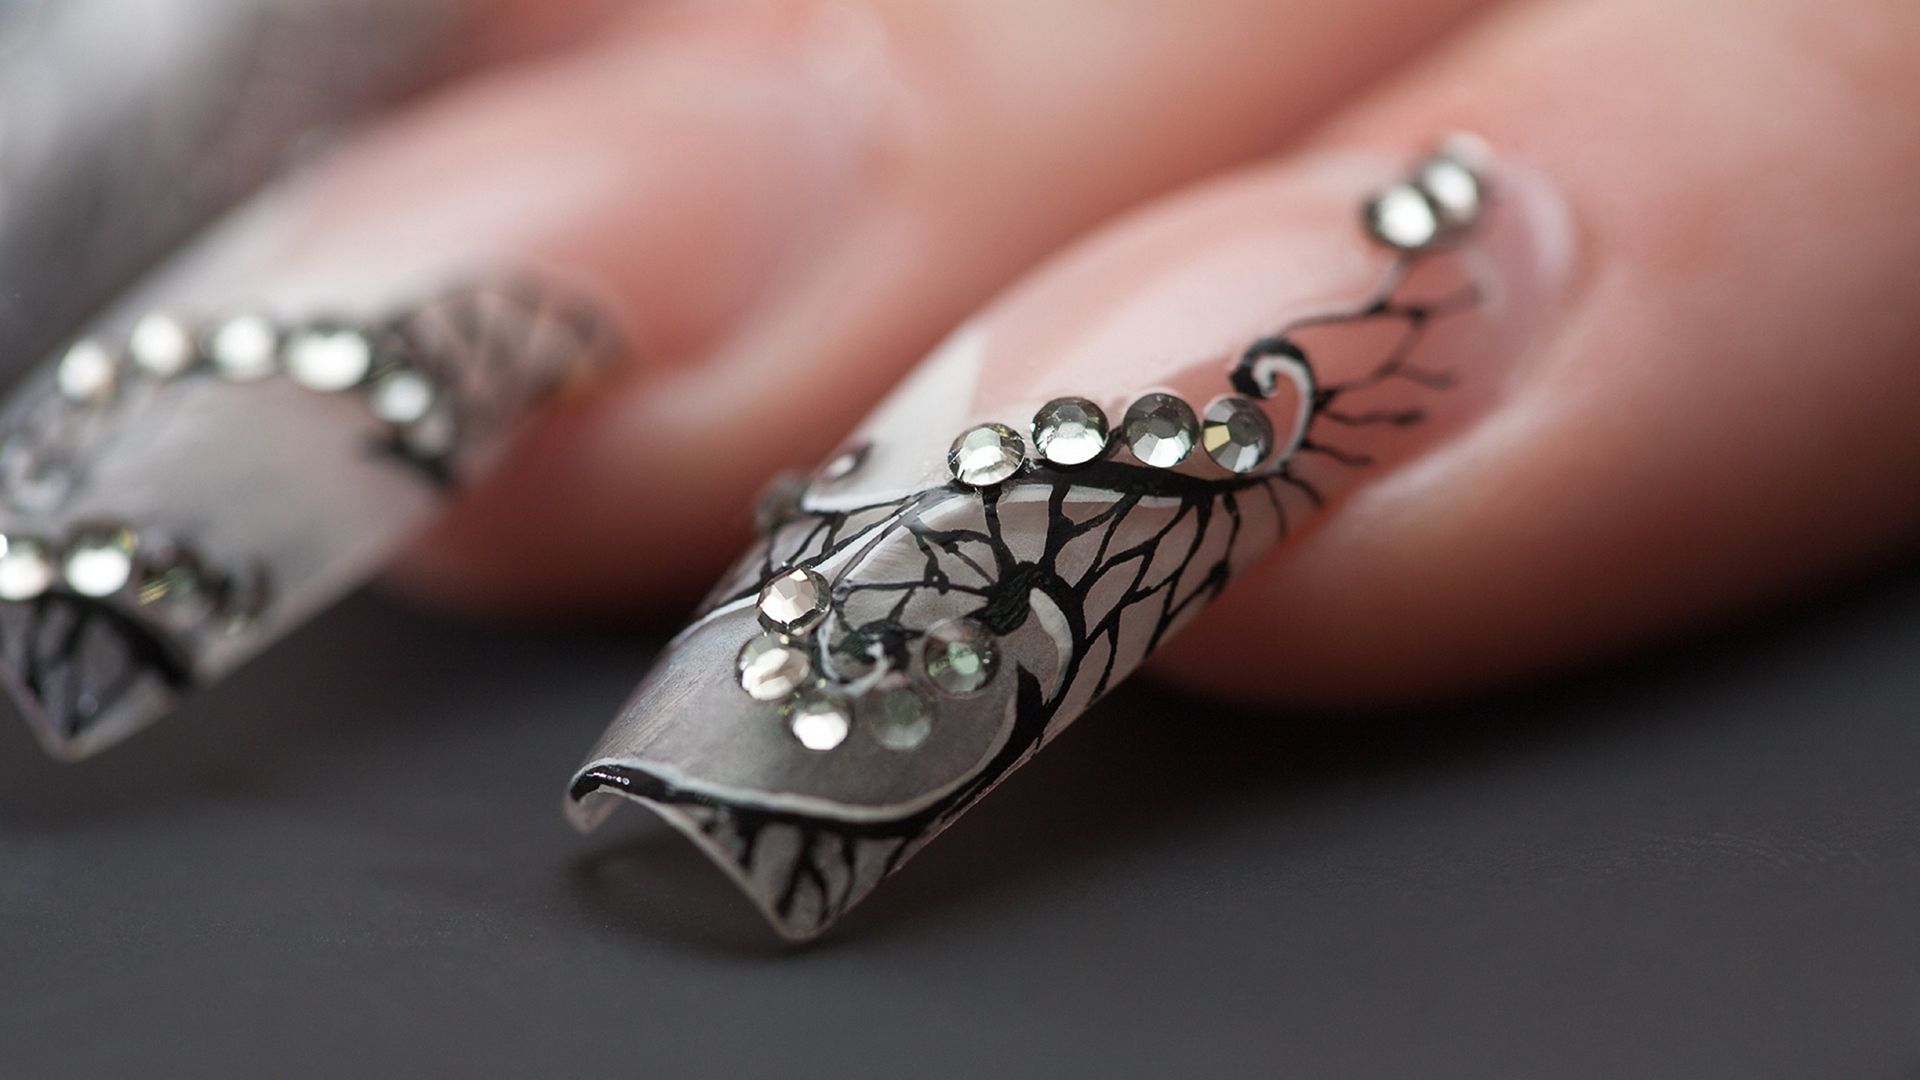 Nail Art Inspiration with Three Dimensional Concept